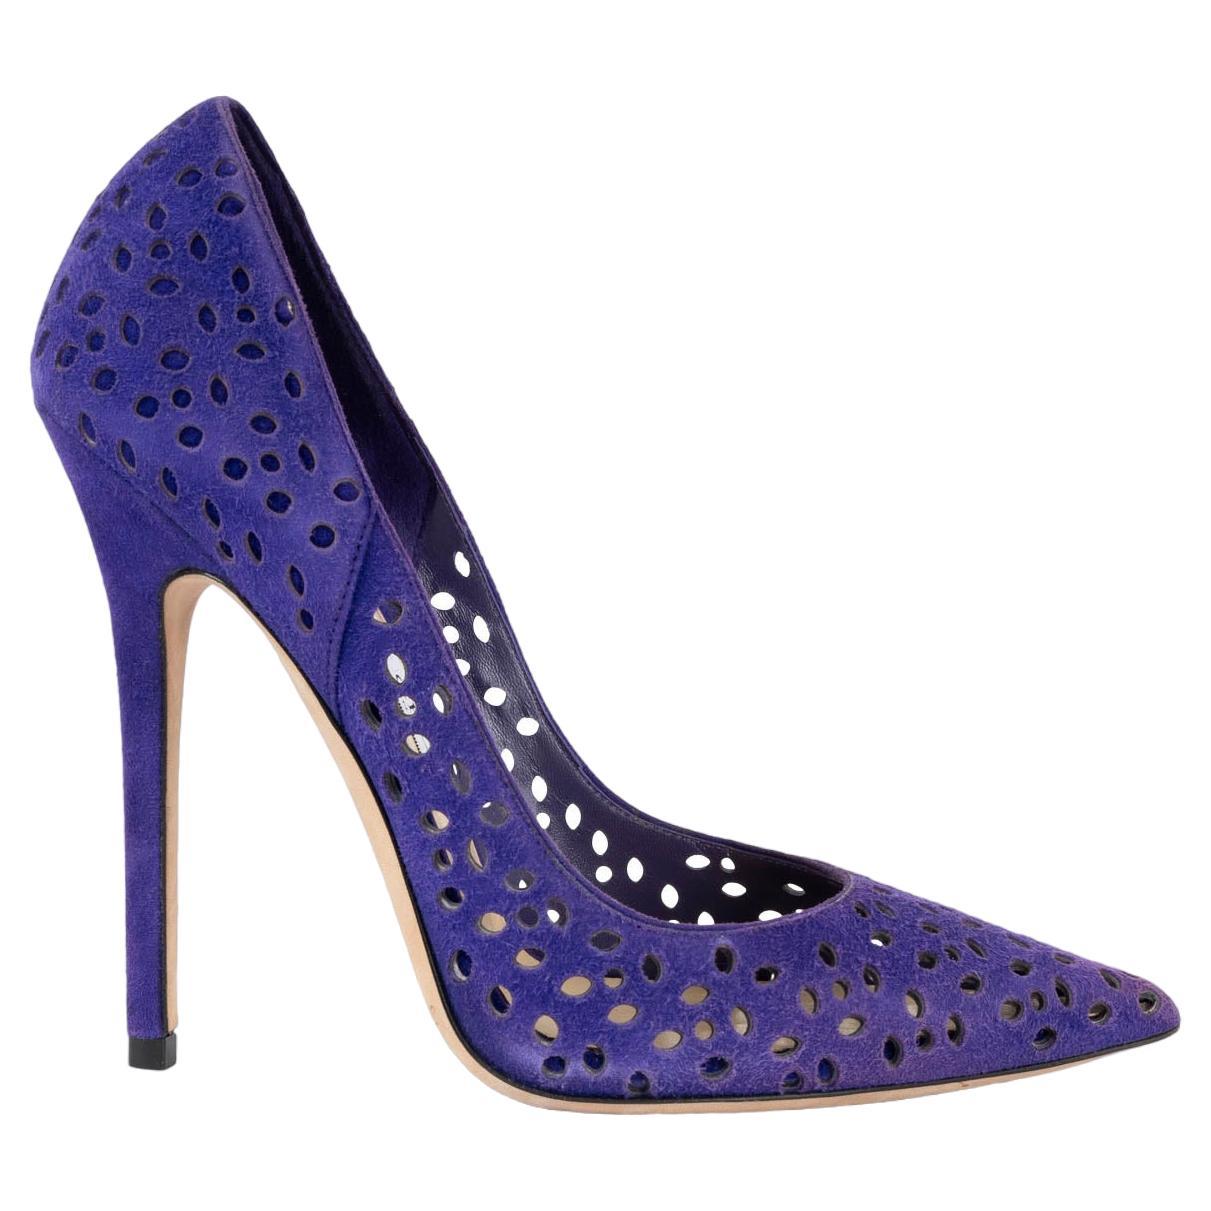 JIMMY CHOO purple suede PERFORATED ANOUK Pumps Shoes 37.5